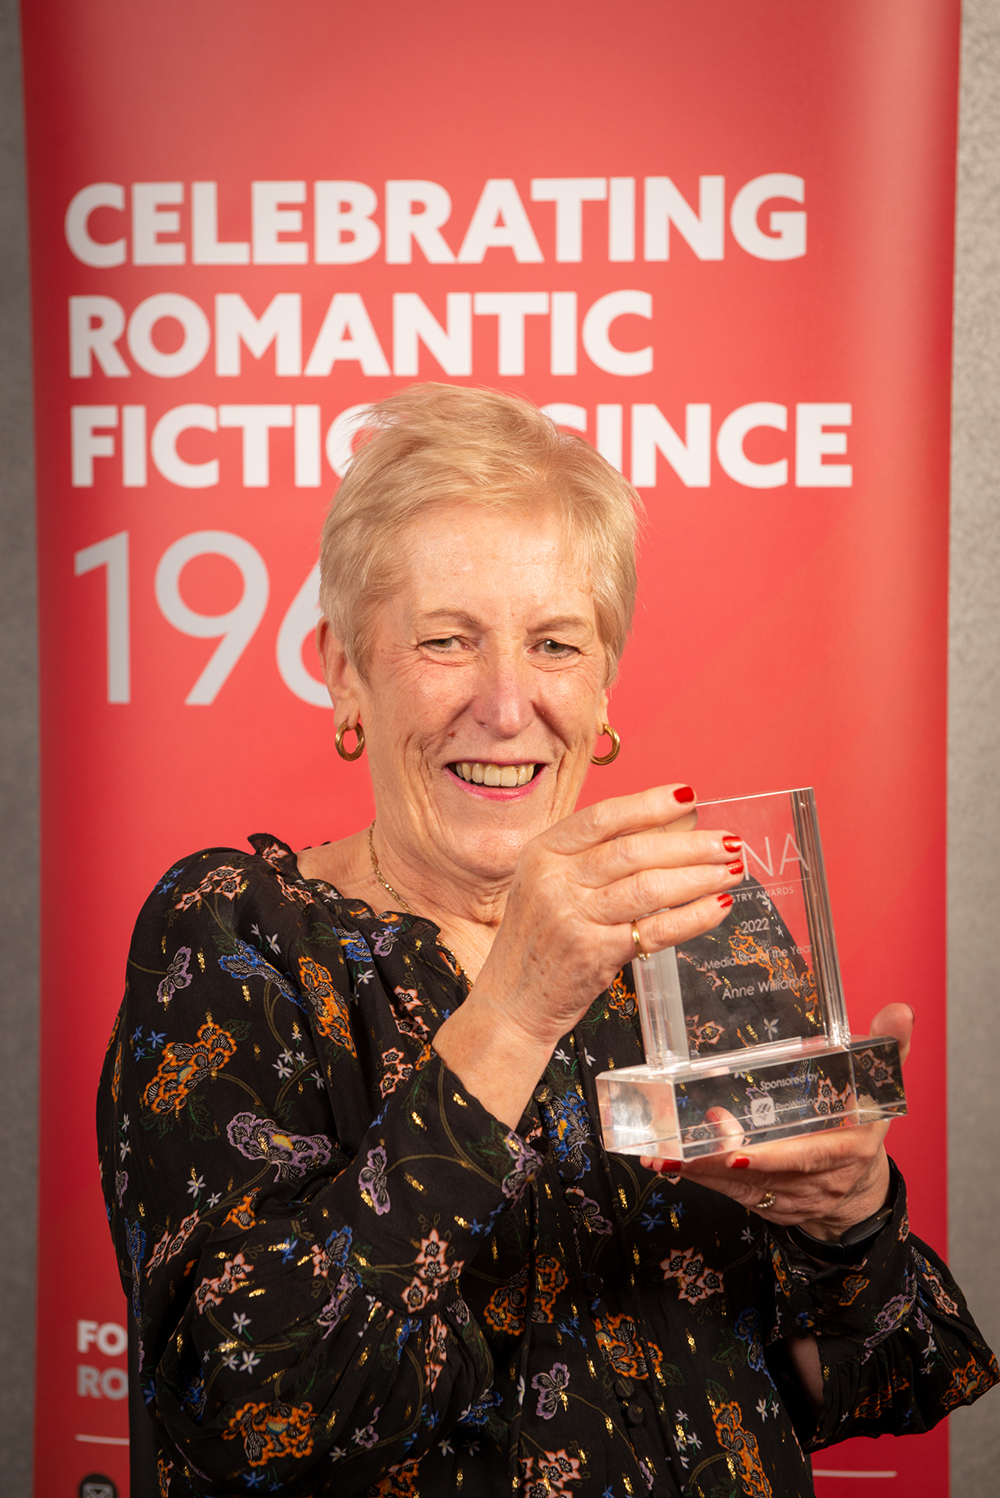 Woman with short blonde hair and patterned black dress holding glass RNA award